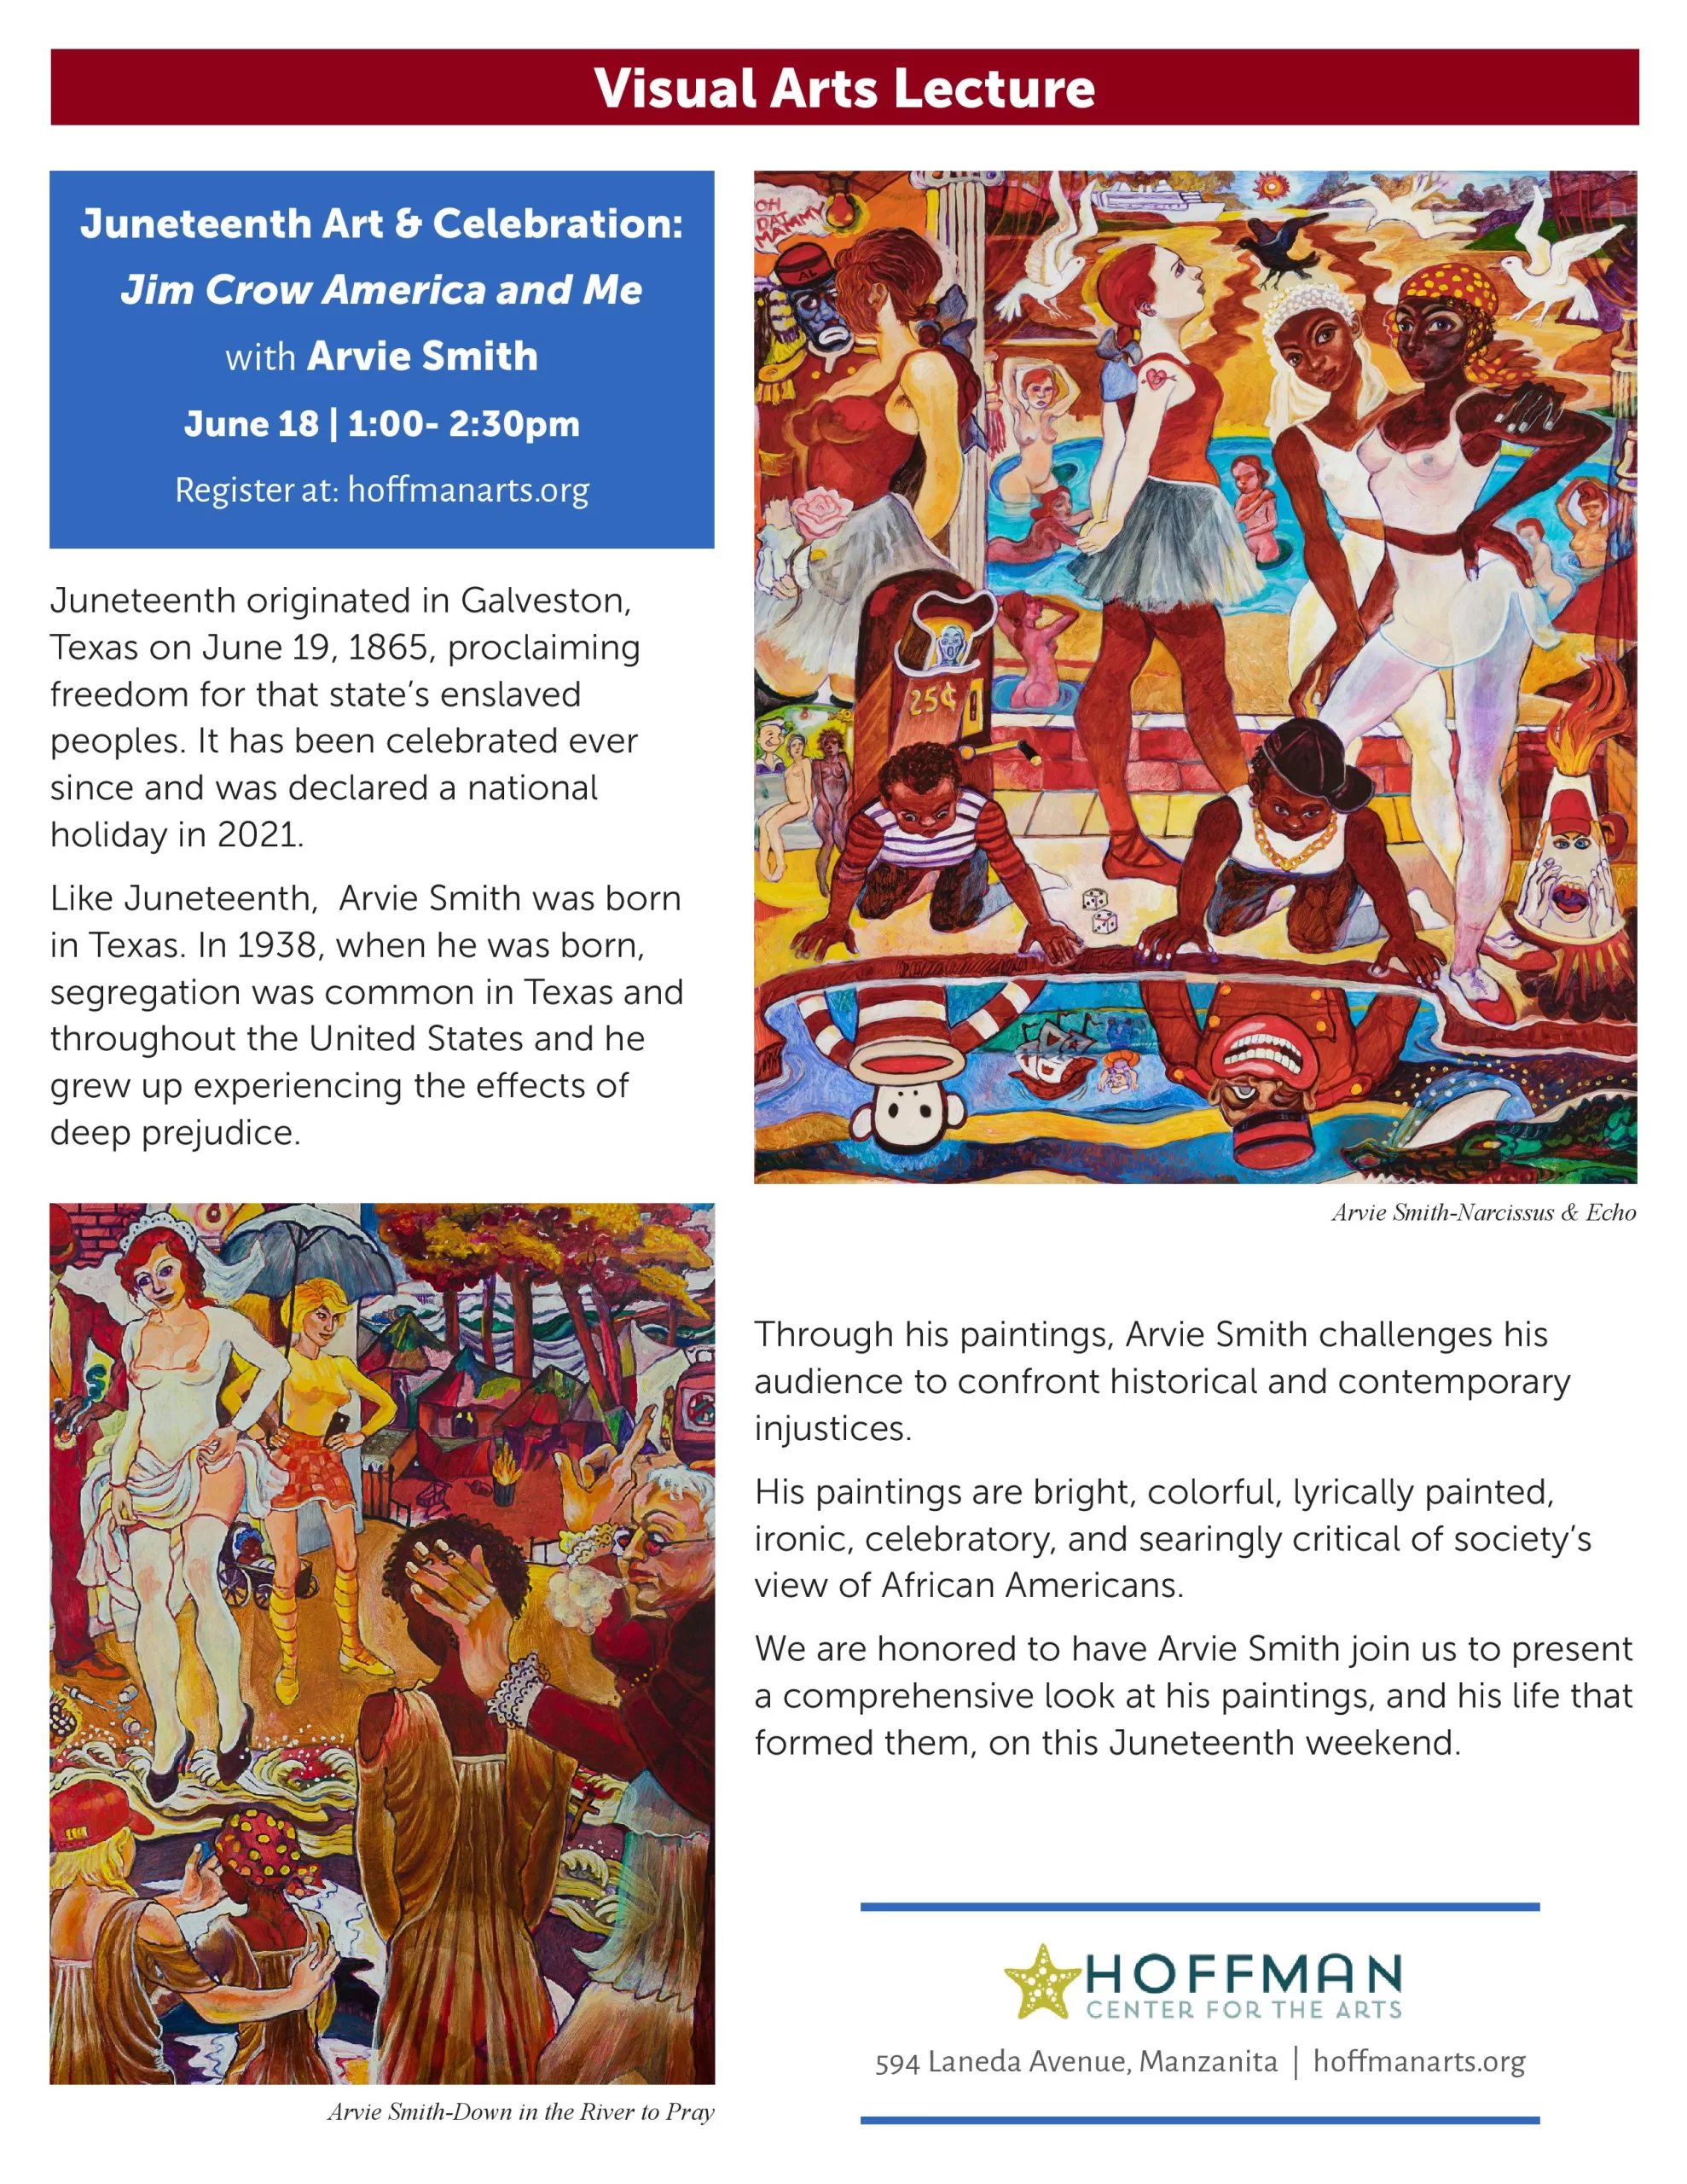 Juneteenth Art and Celebration – Jim Crow America and Me, June 18th